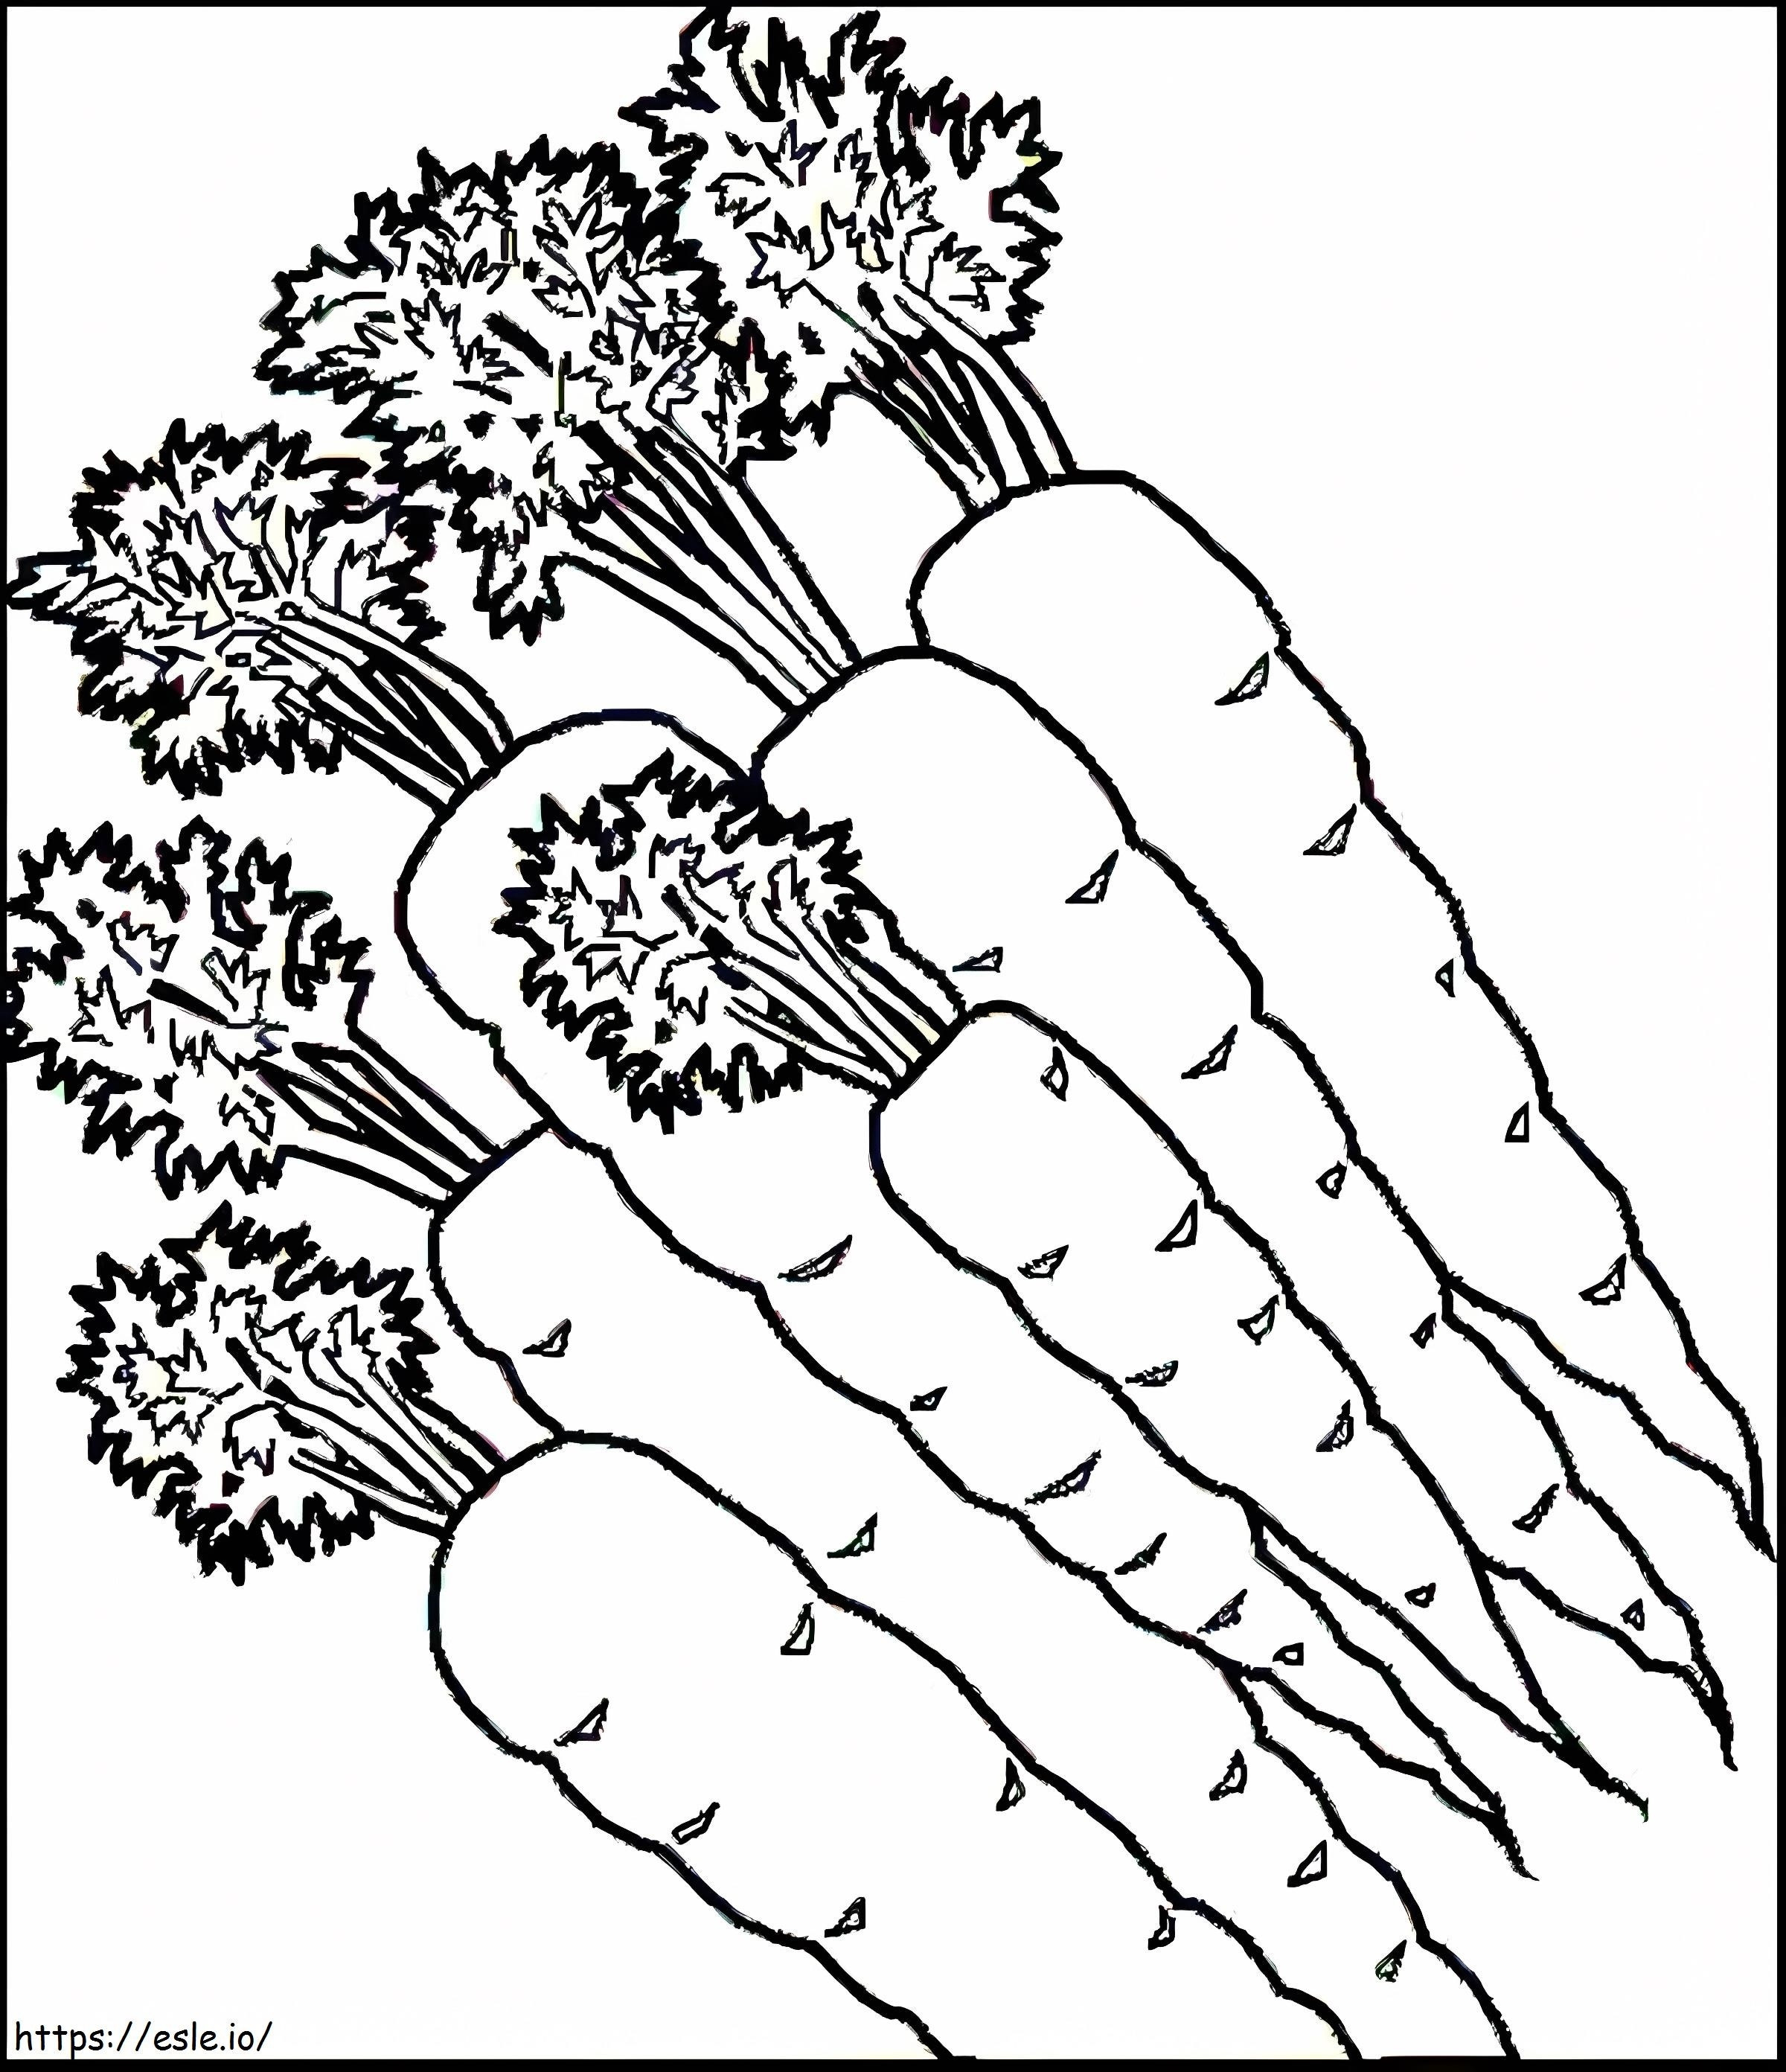 Six Carrots coloring page